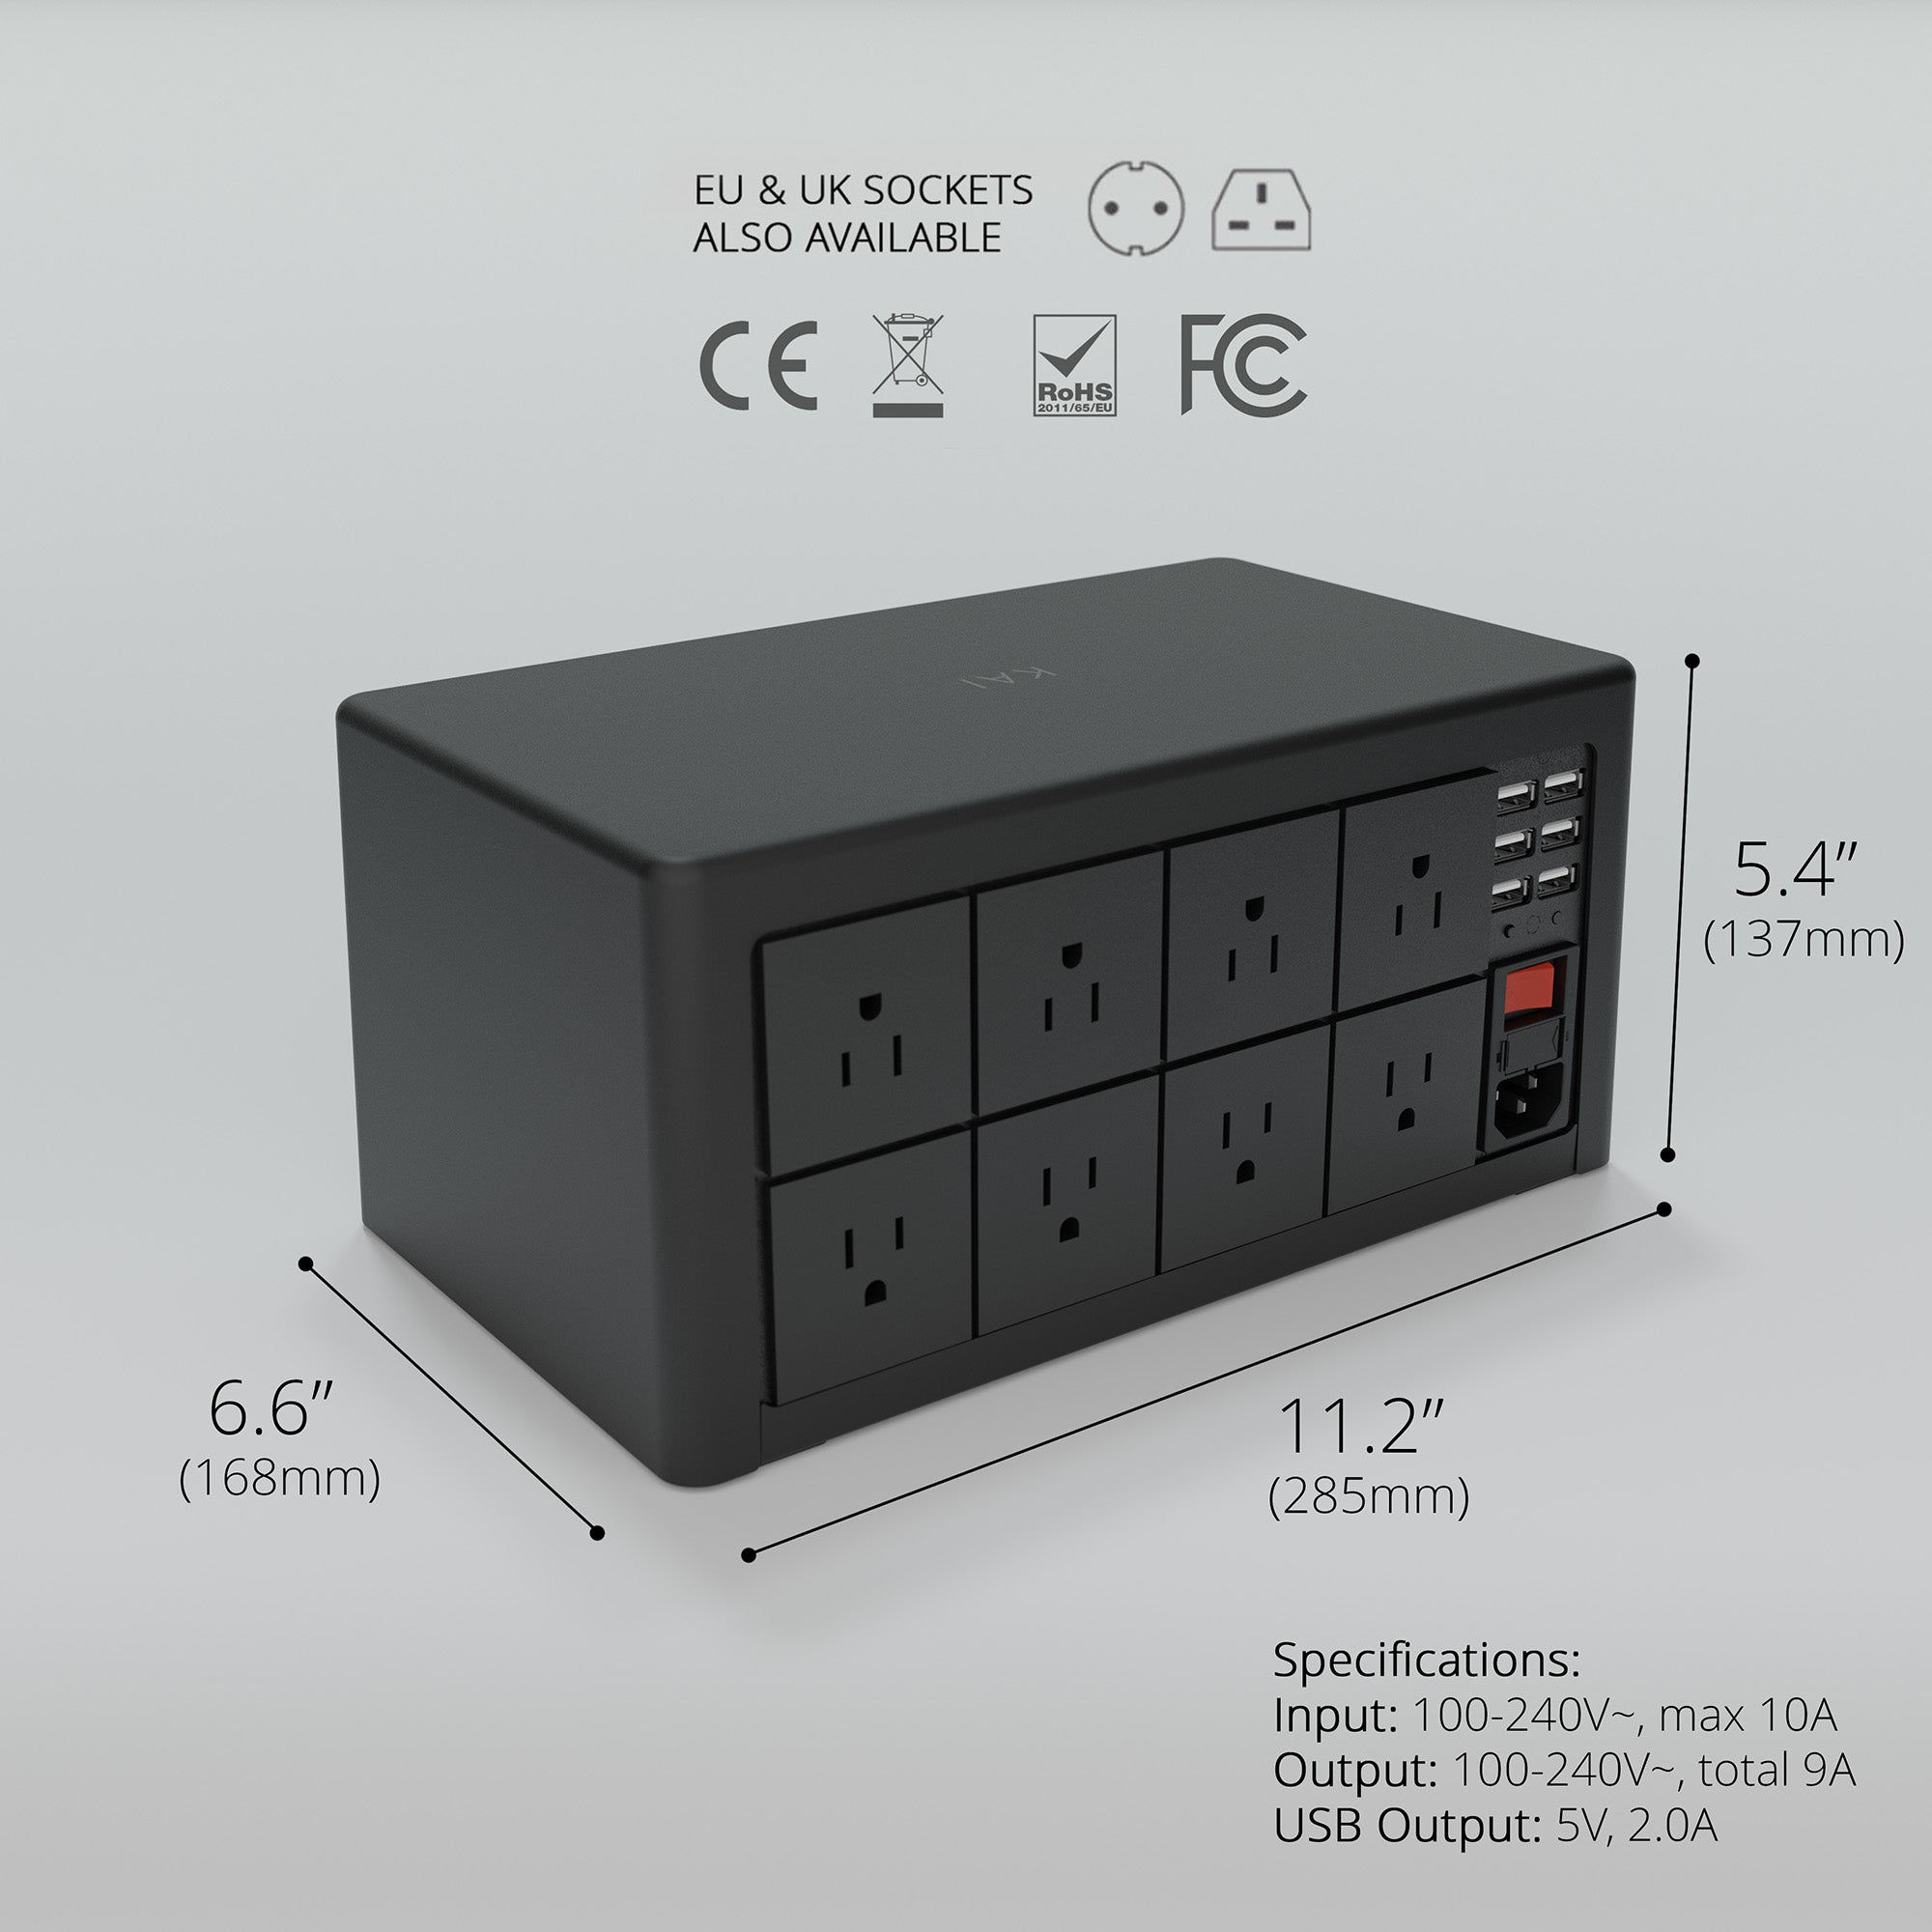 KAI AI Smart Controller pictured from the back, showing off dimensions of the box L: 11.2", W: 6.6", H: 5.4". North American sockets are shown, however the image says that EU and UK sockets are also available. Image shows power specifications for the unit, as Input: 100-240V~, max 10A Output: 100-240V~, total 9A, USB Output: 5V, 2.0A.